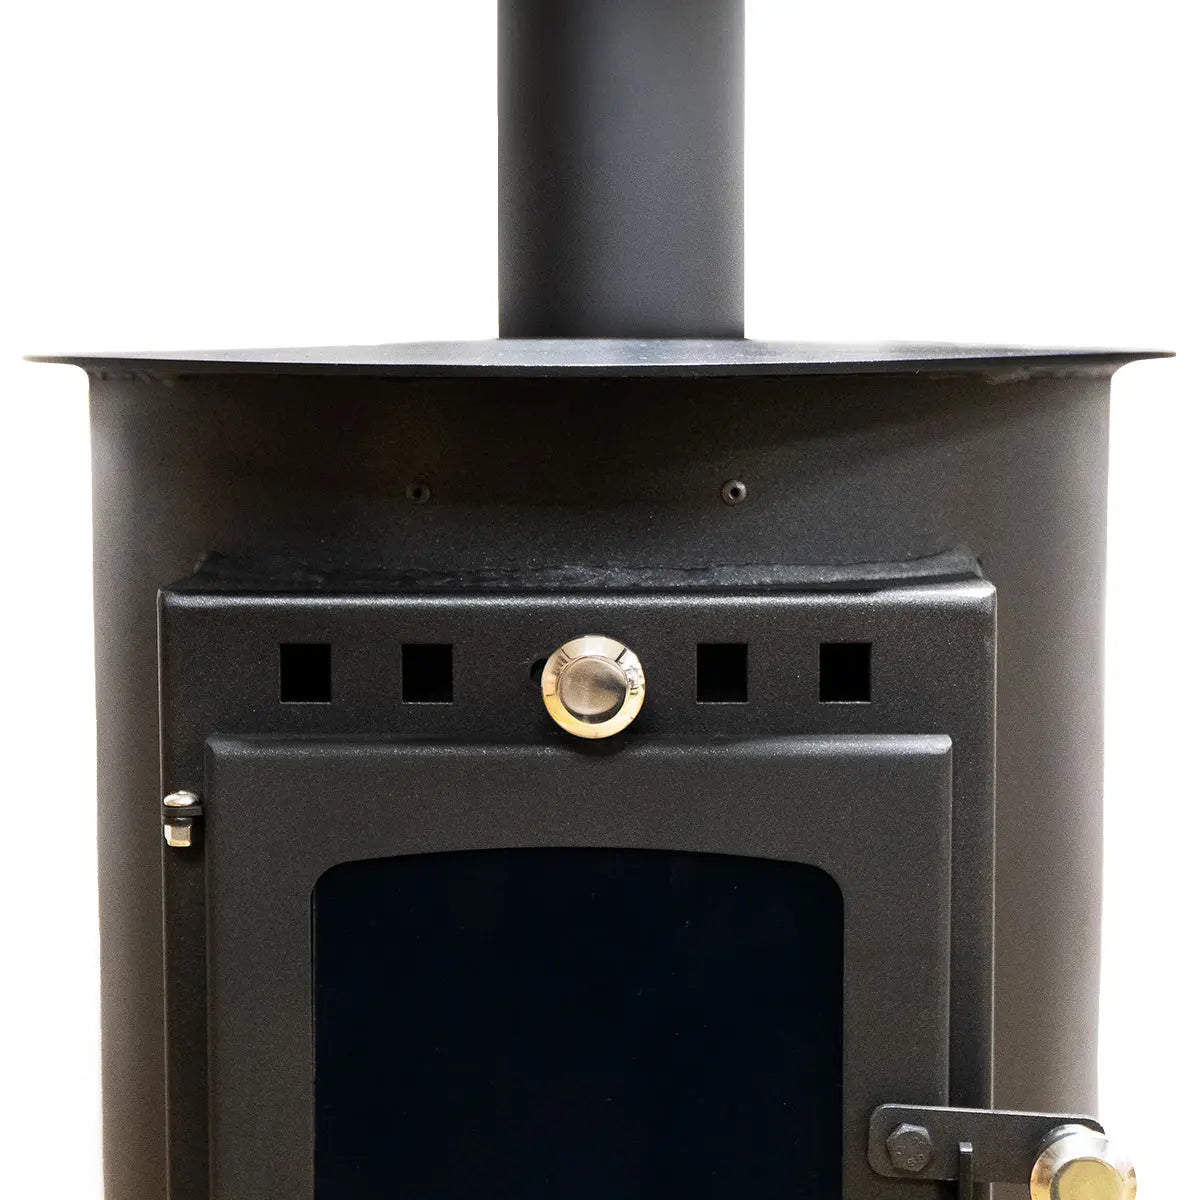 https://comps.countryliving.co.uk/competition/woodburningstove-231220.php